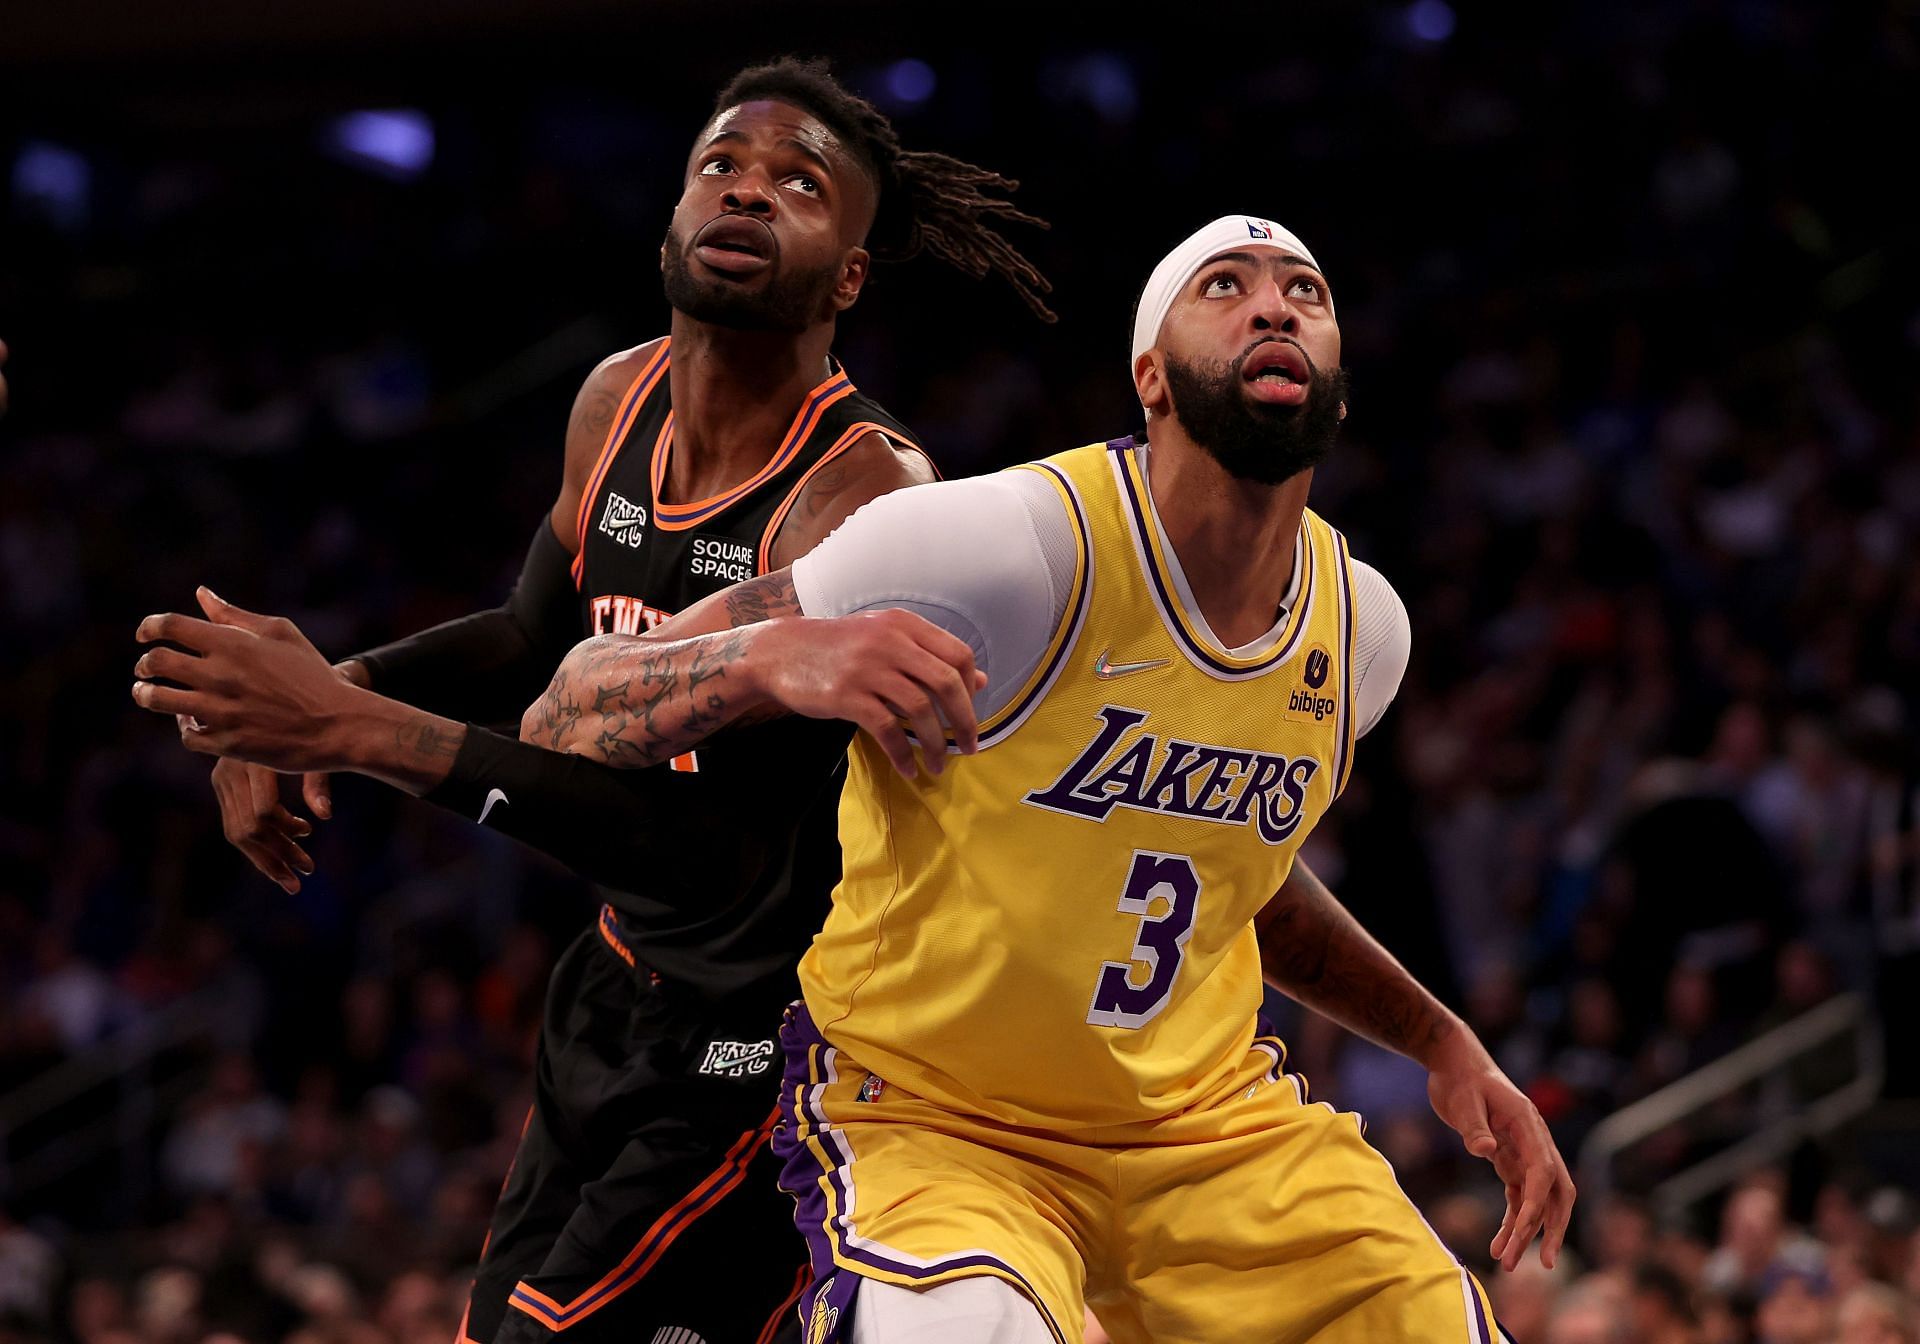 Anthony Davis #3 of the Los Angeles Lakers and Nerlens Noel #3 of the New York Knicks battle for position